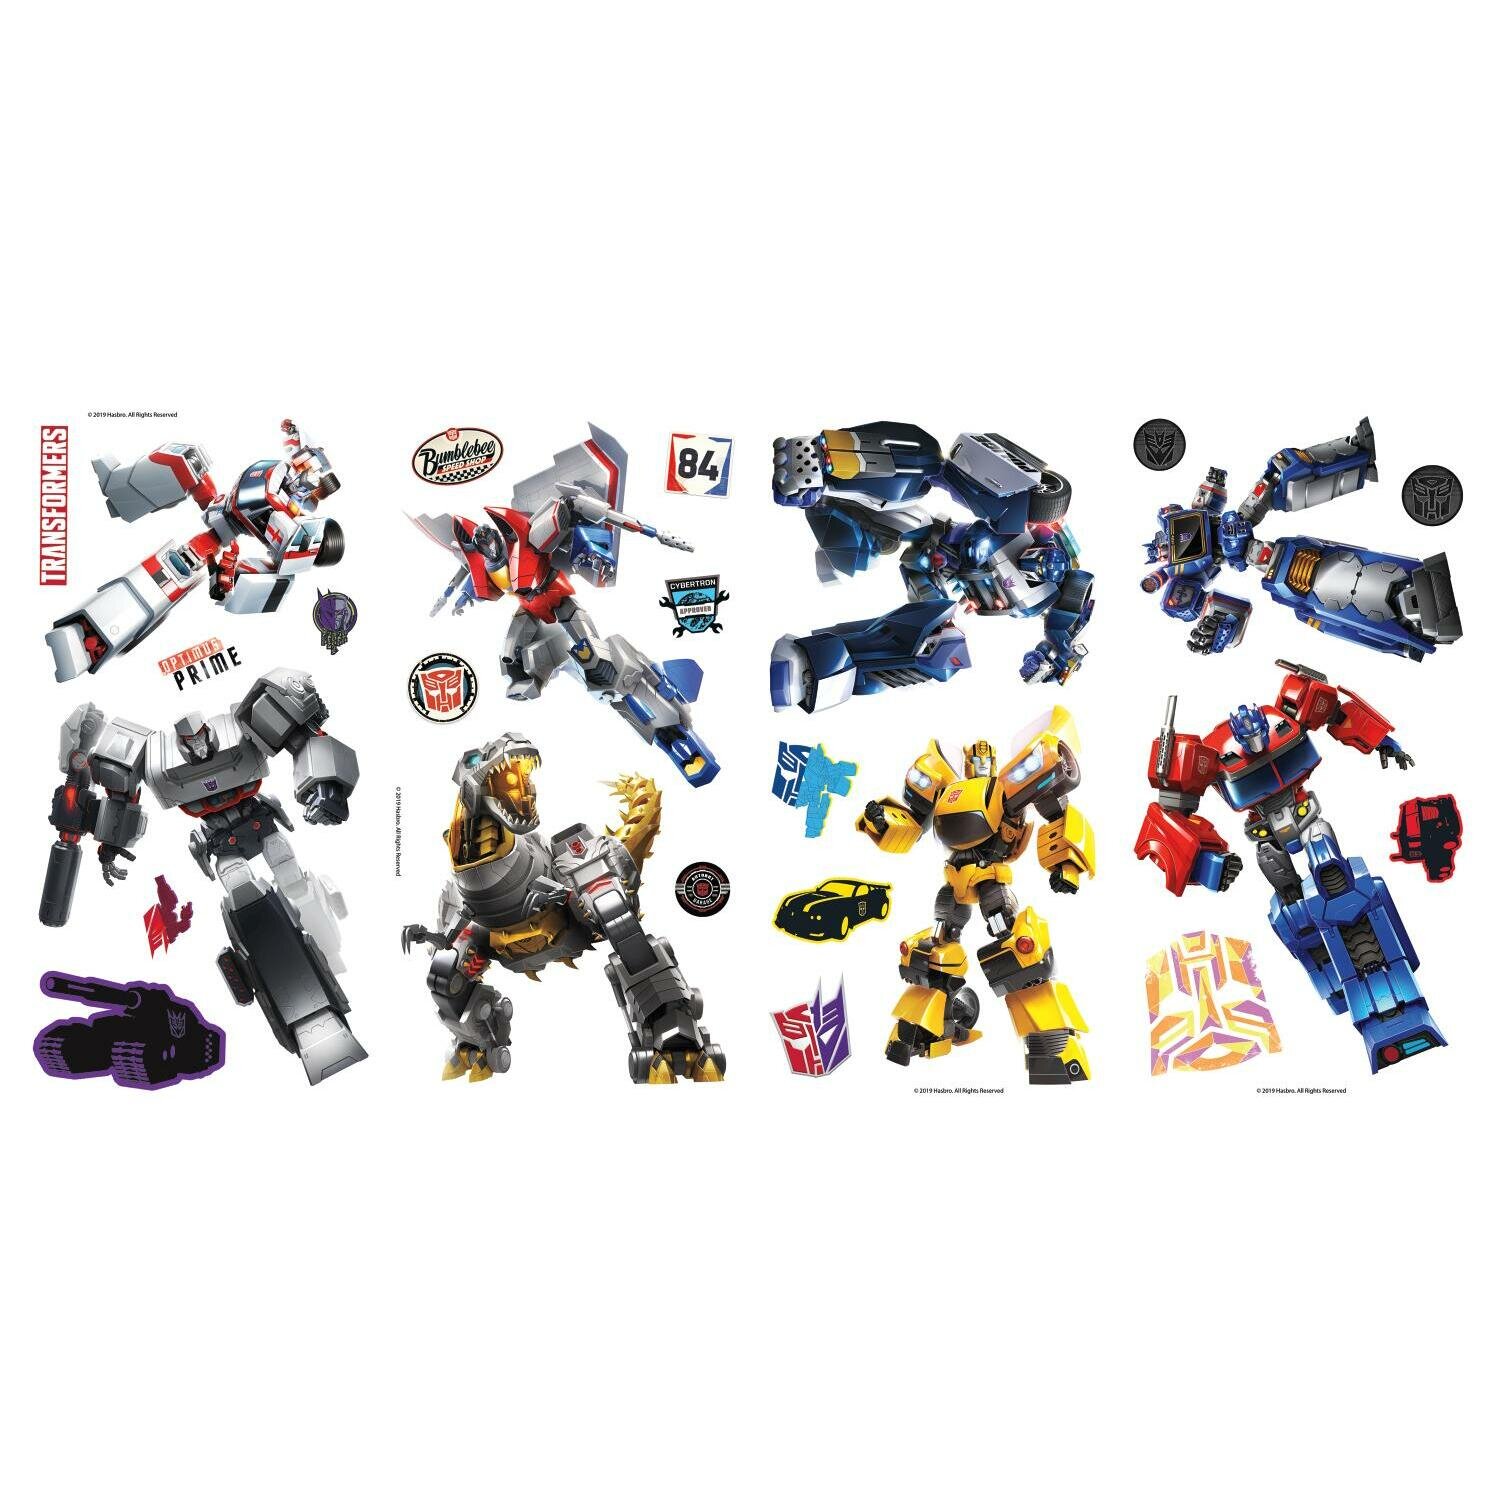 Age of Extinction Bumblebee Peel and Stick Giant Wall Decals York Wallcoverings RMK2526GM RoomMates Transformers 